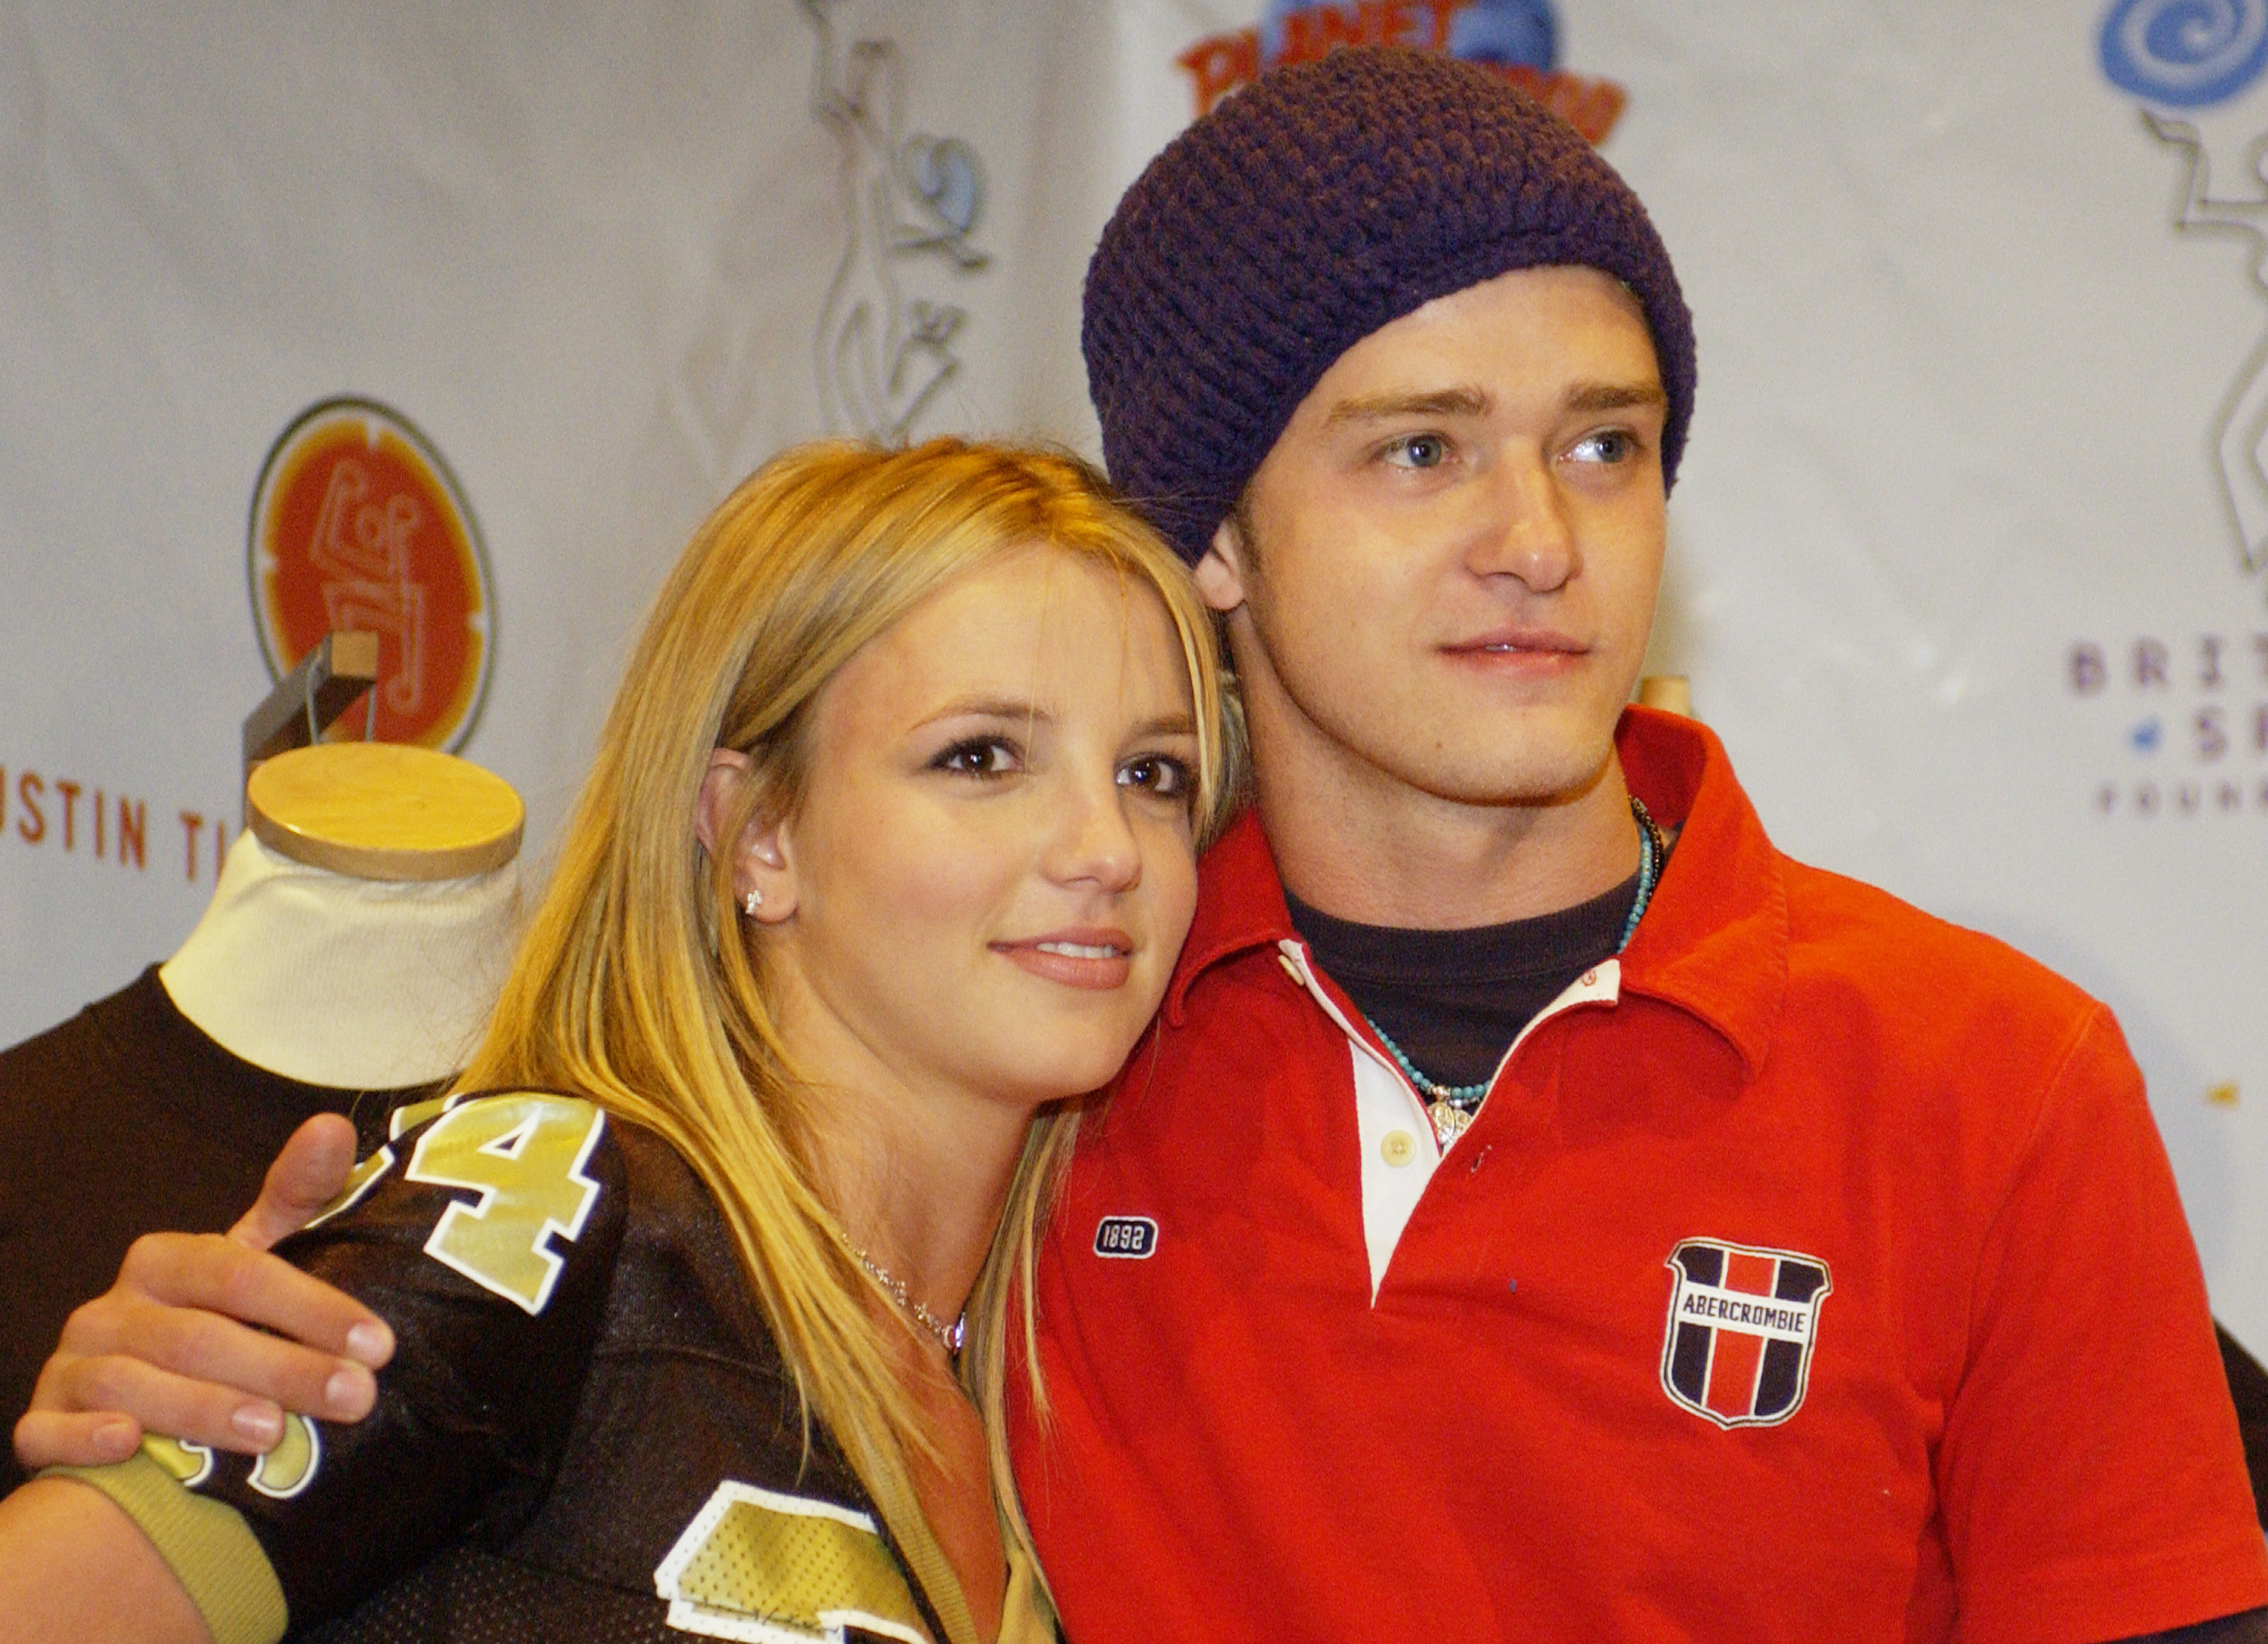 Britney and Justin at a media event